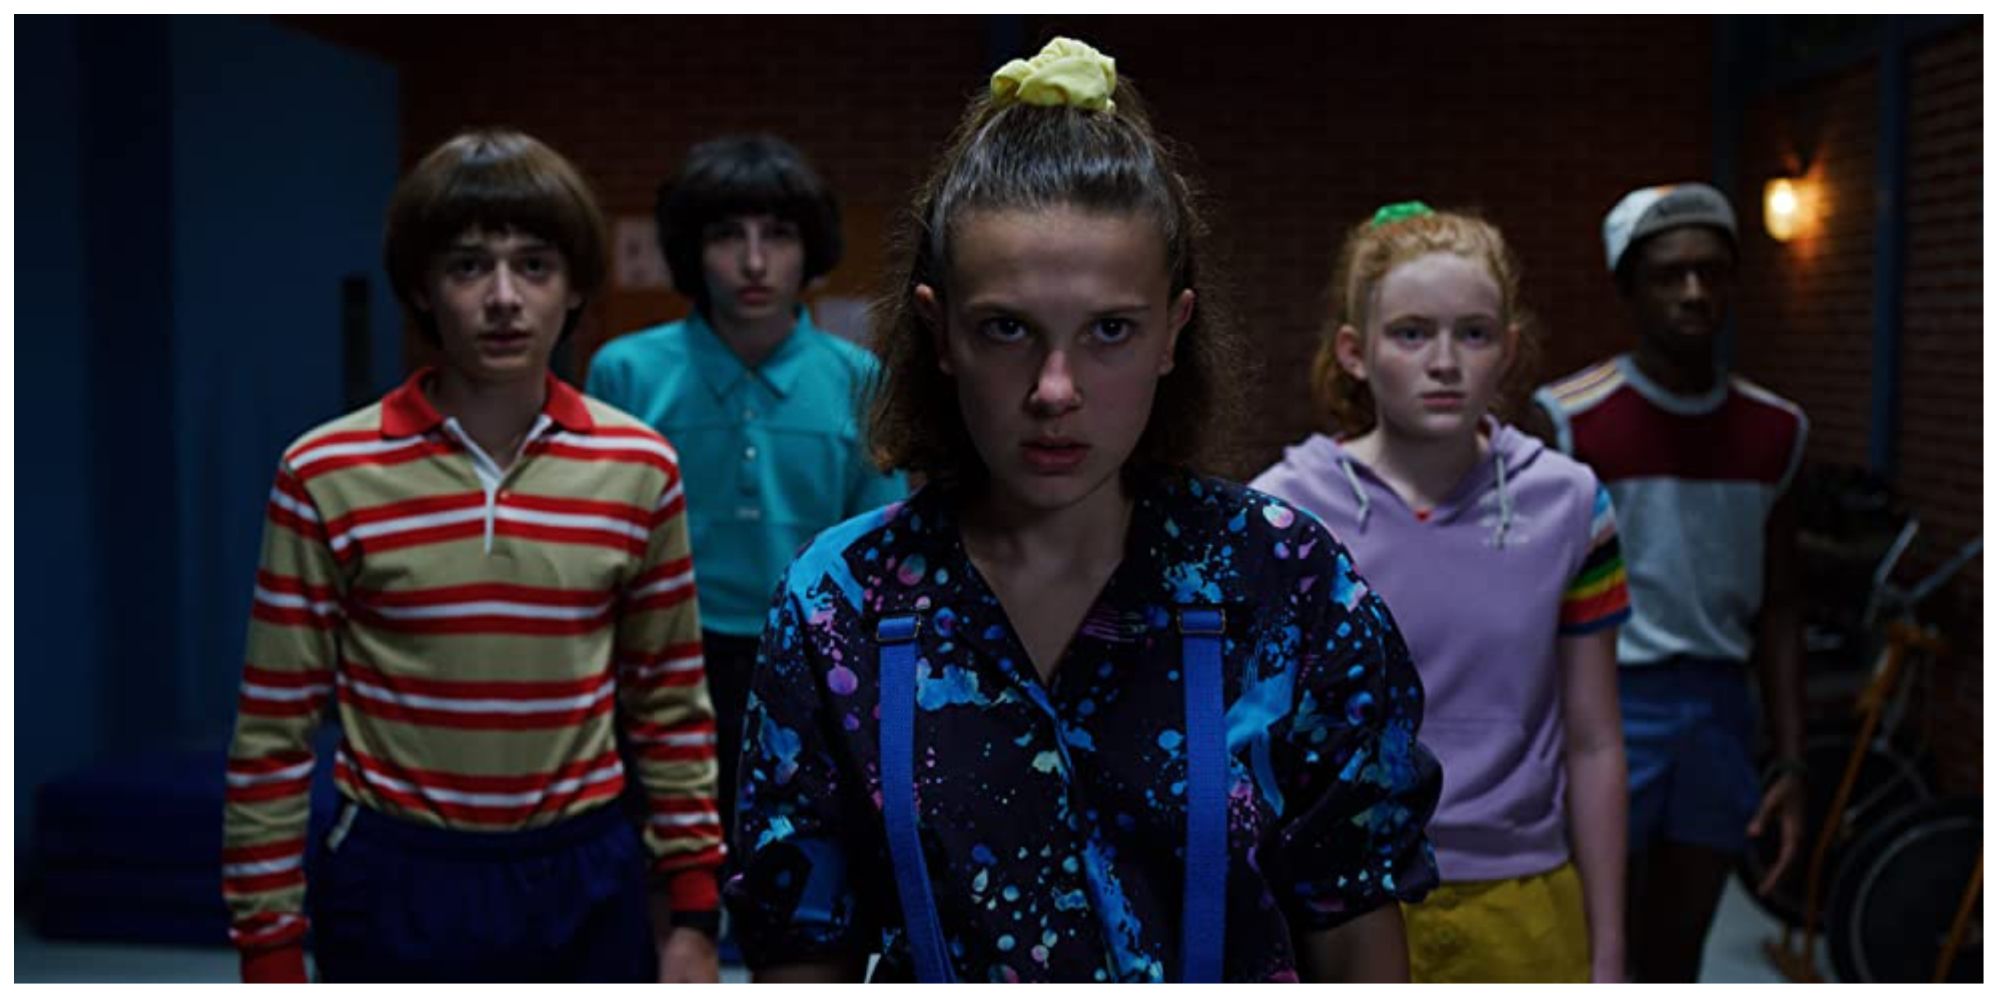 From left to right: Will, Mike, Eleven, Max and Lucas facing the villain (offscreen) in Stranger Things looking both angry and scared